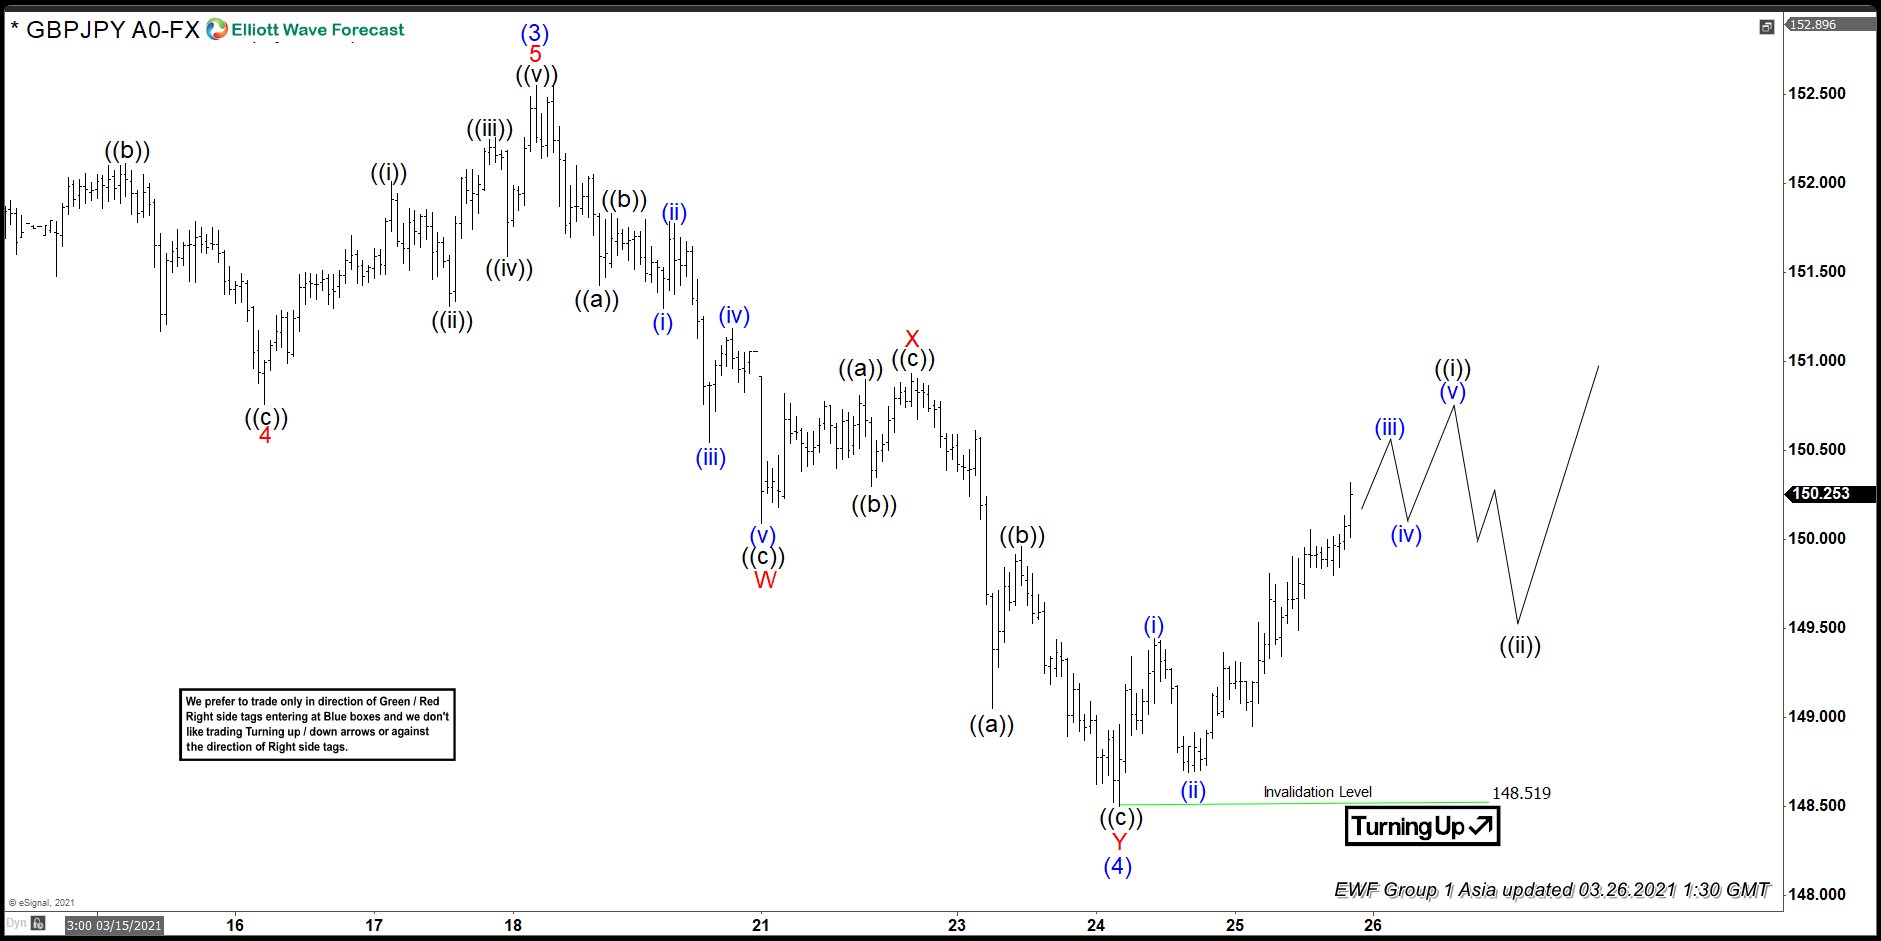 Elliott Wave View: GBPJPY Ended Correction